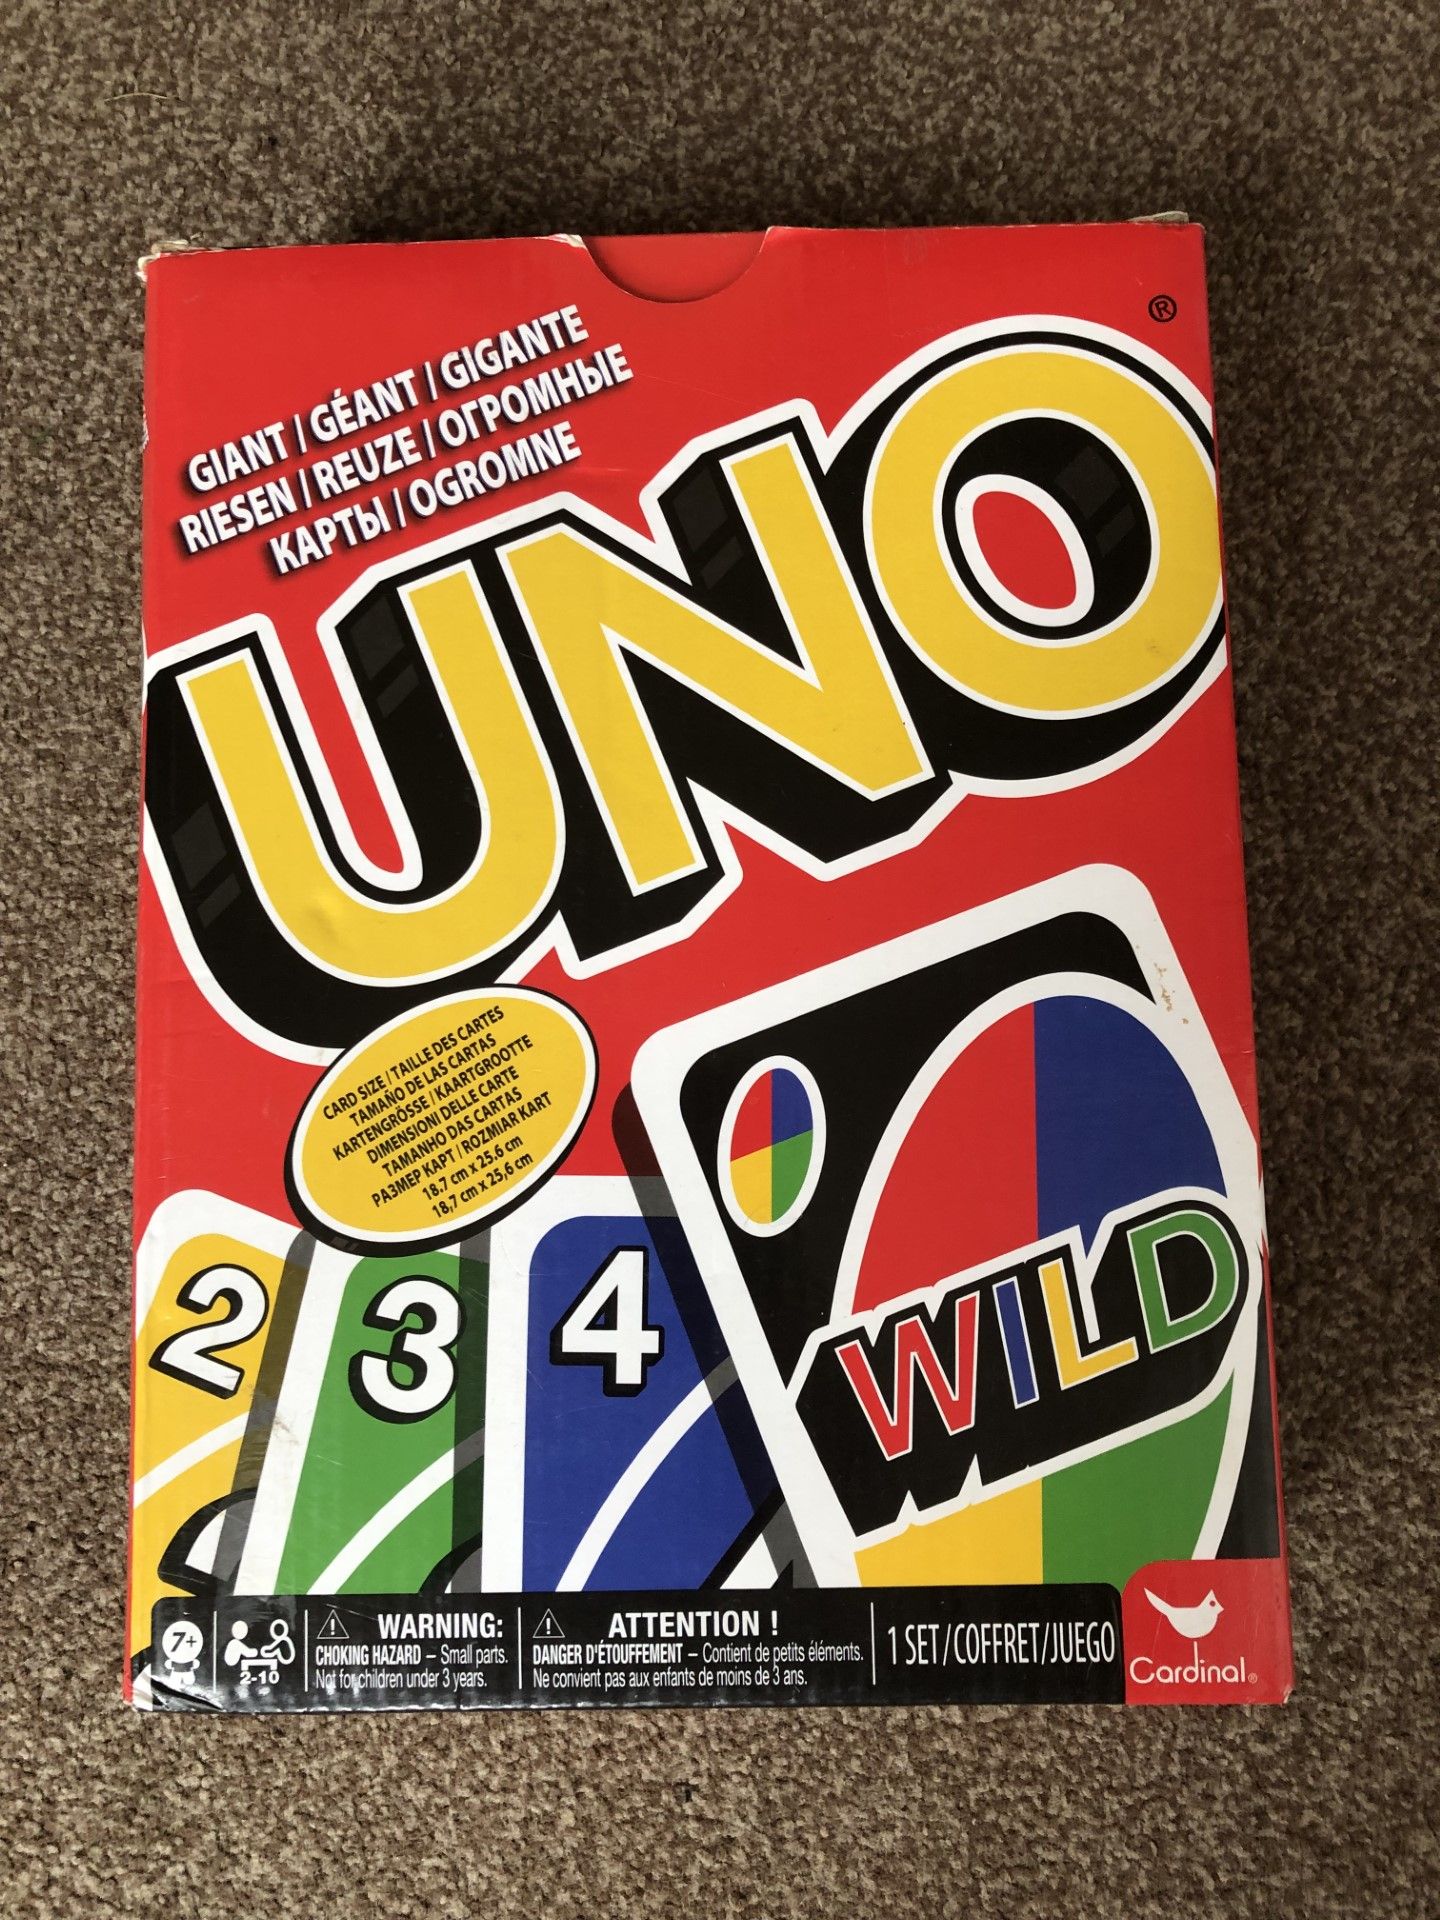 Product Details, Giant UNO